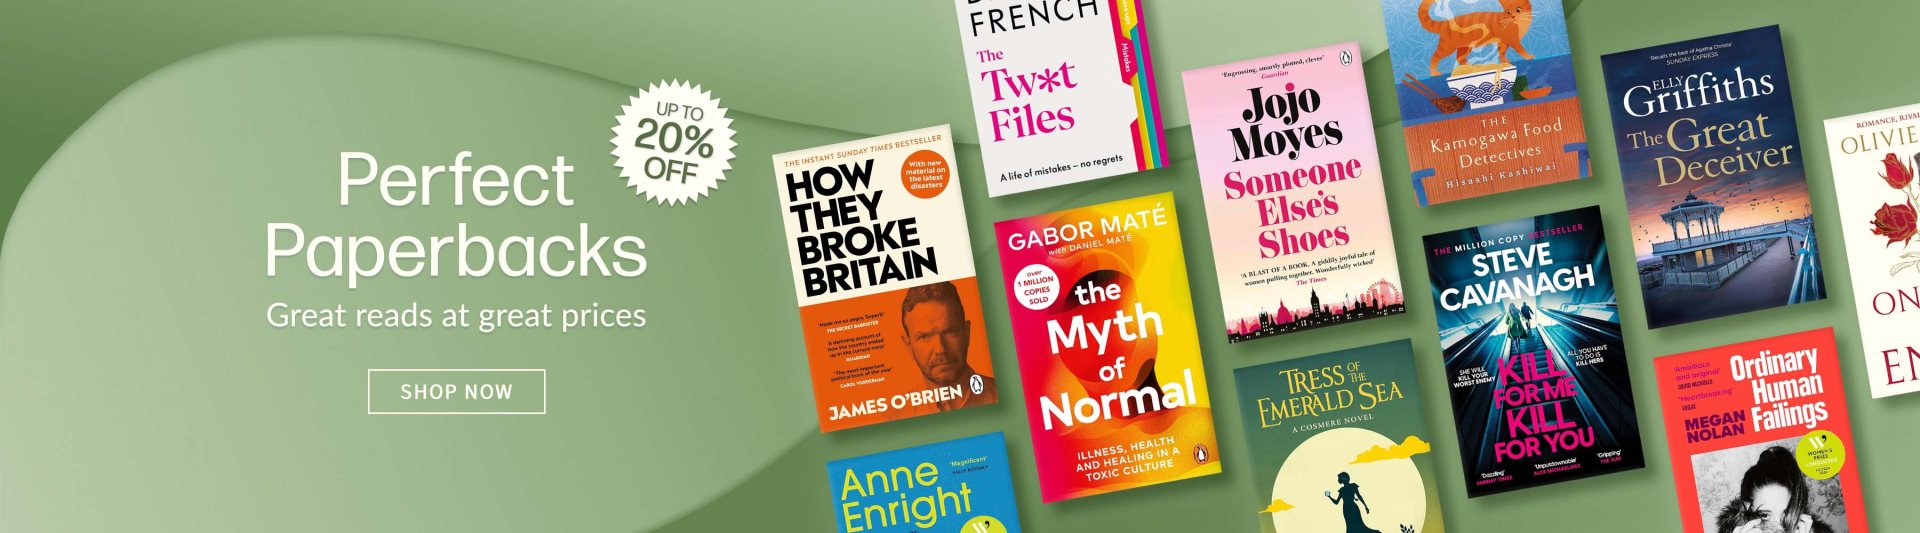 Perfect Paperbacks Up to 20% Off | SHOP NOW